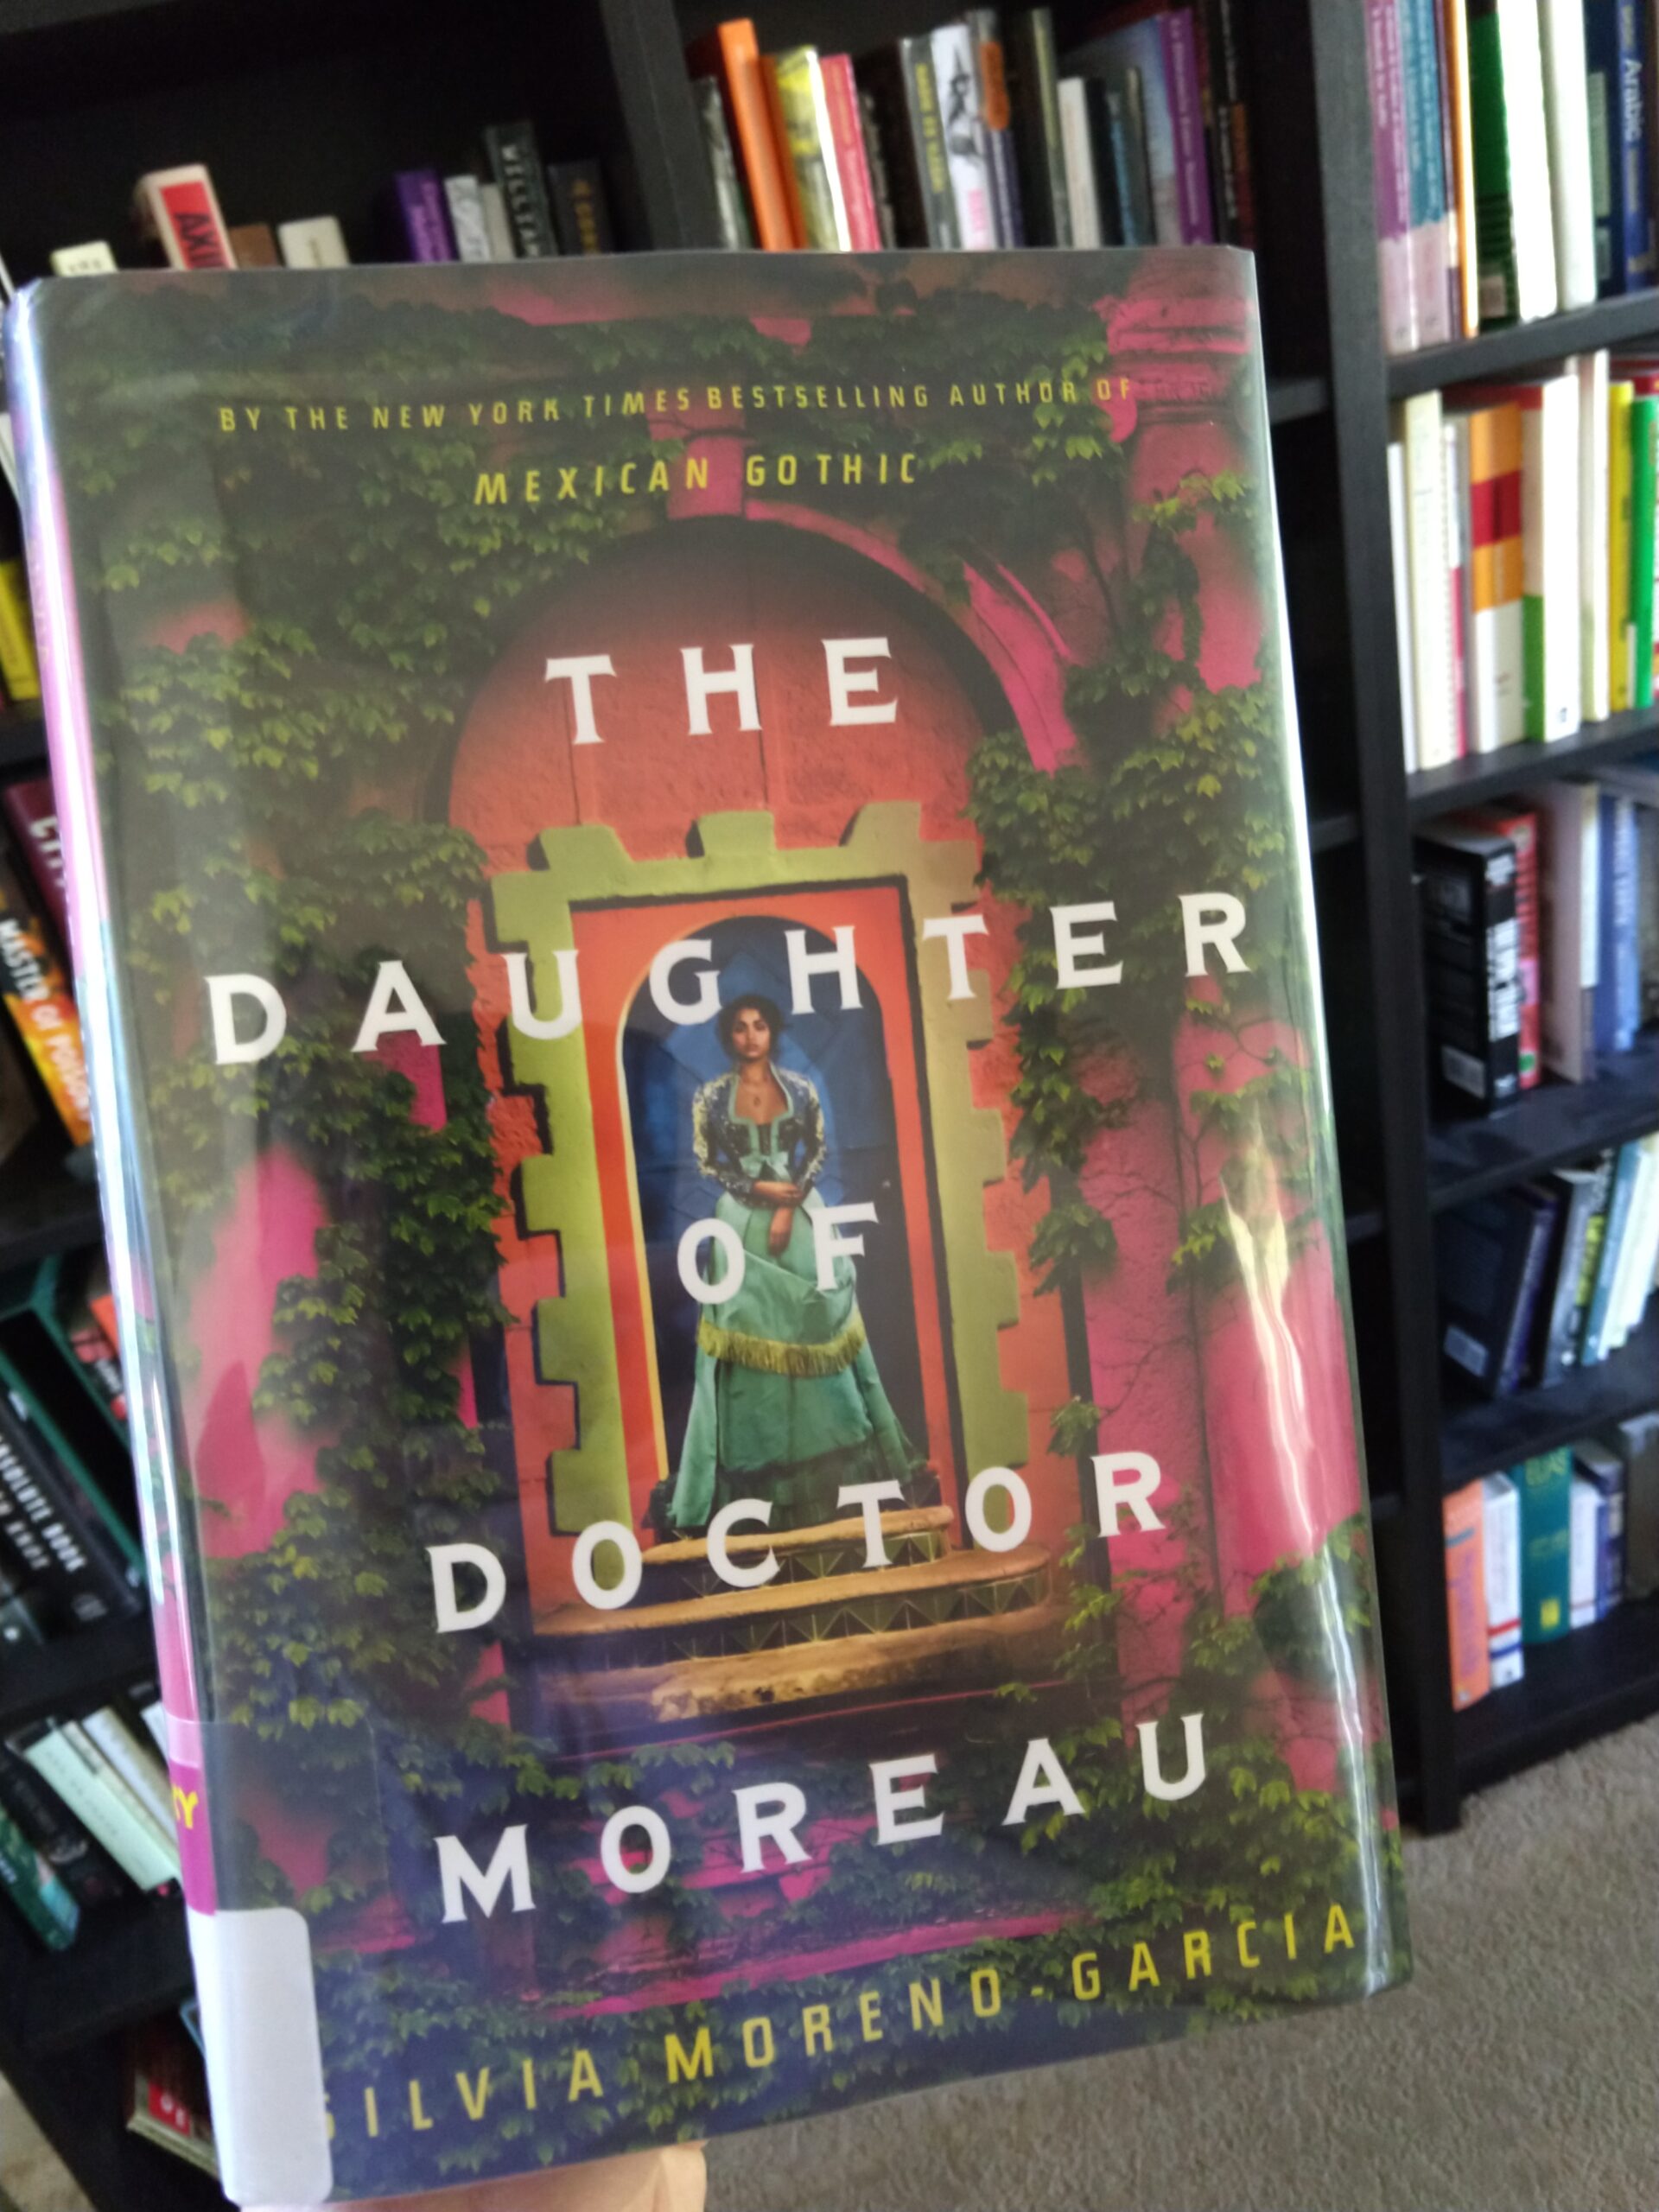 hardcover book from the library: The Daughter of Doctor Moreau by Silvia Moreno-Garcia. The cover shows a pretty young woman wearing a gown, standing in a doorway/arch that is covered in leaves